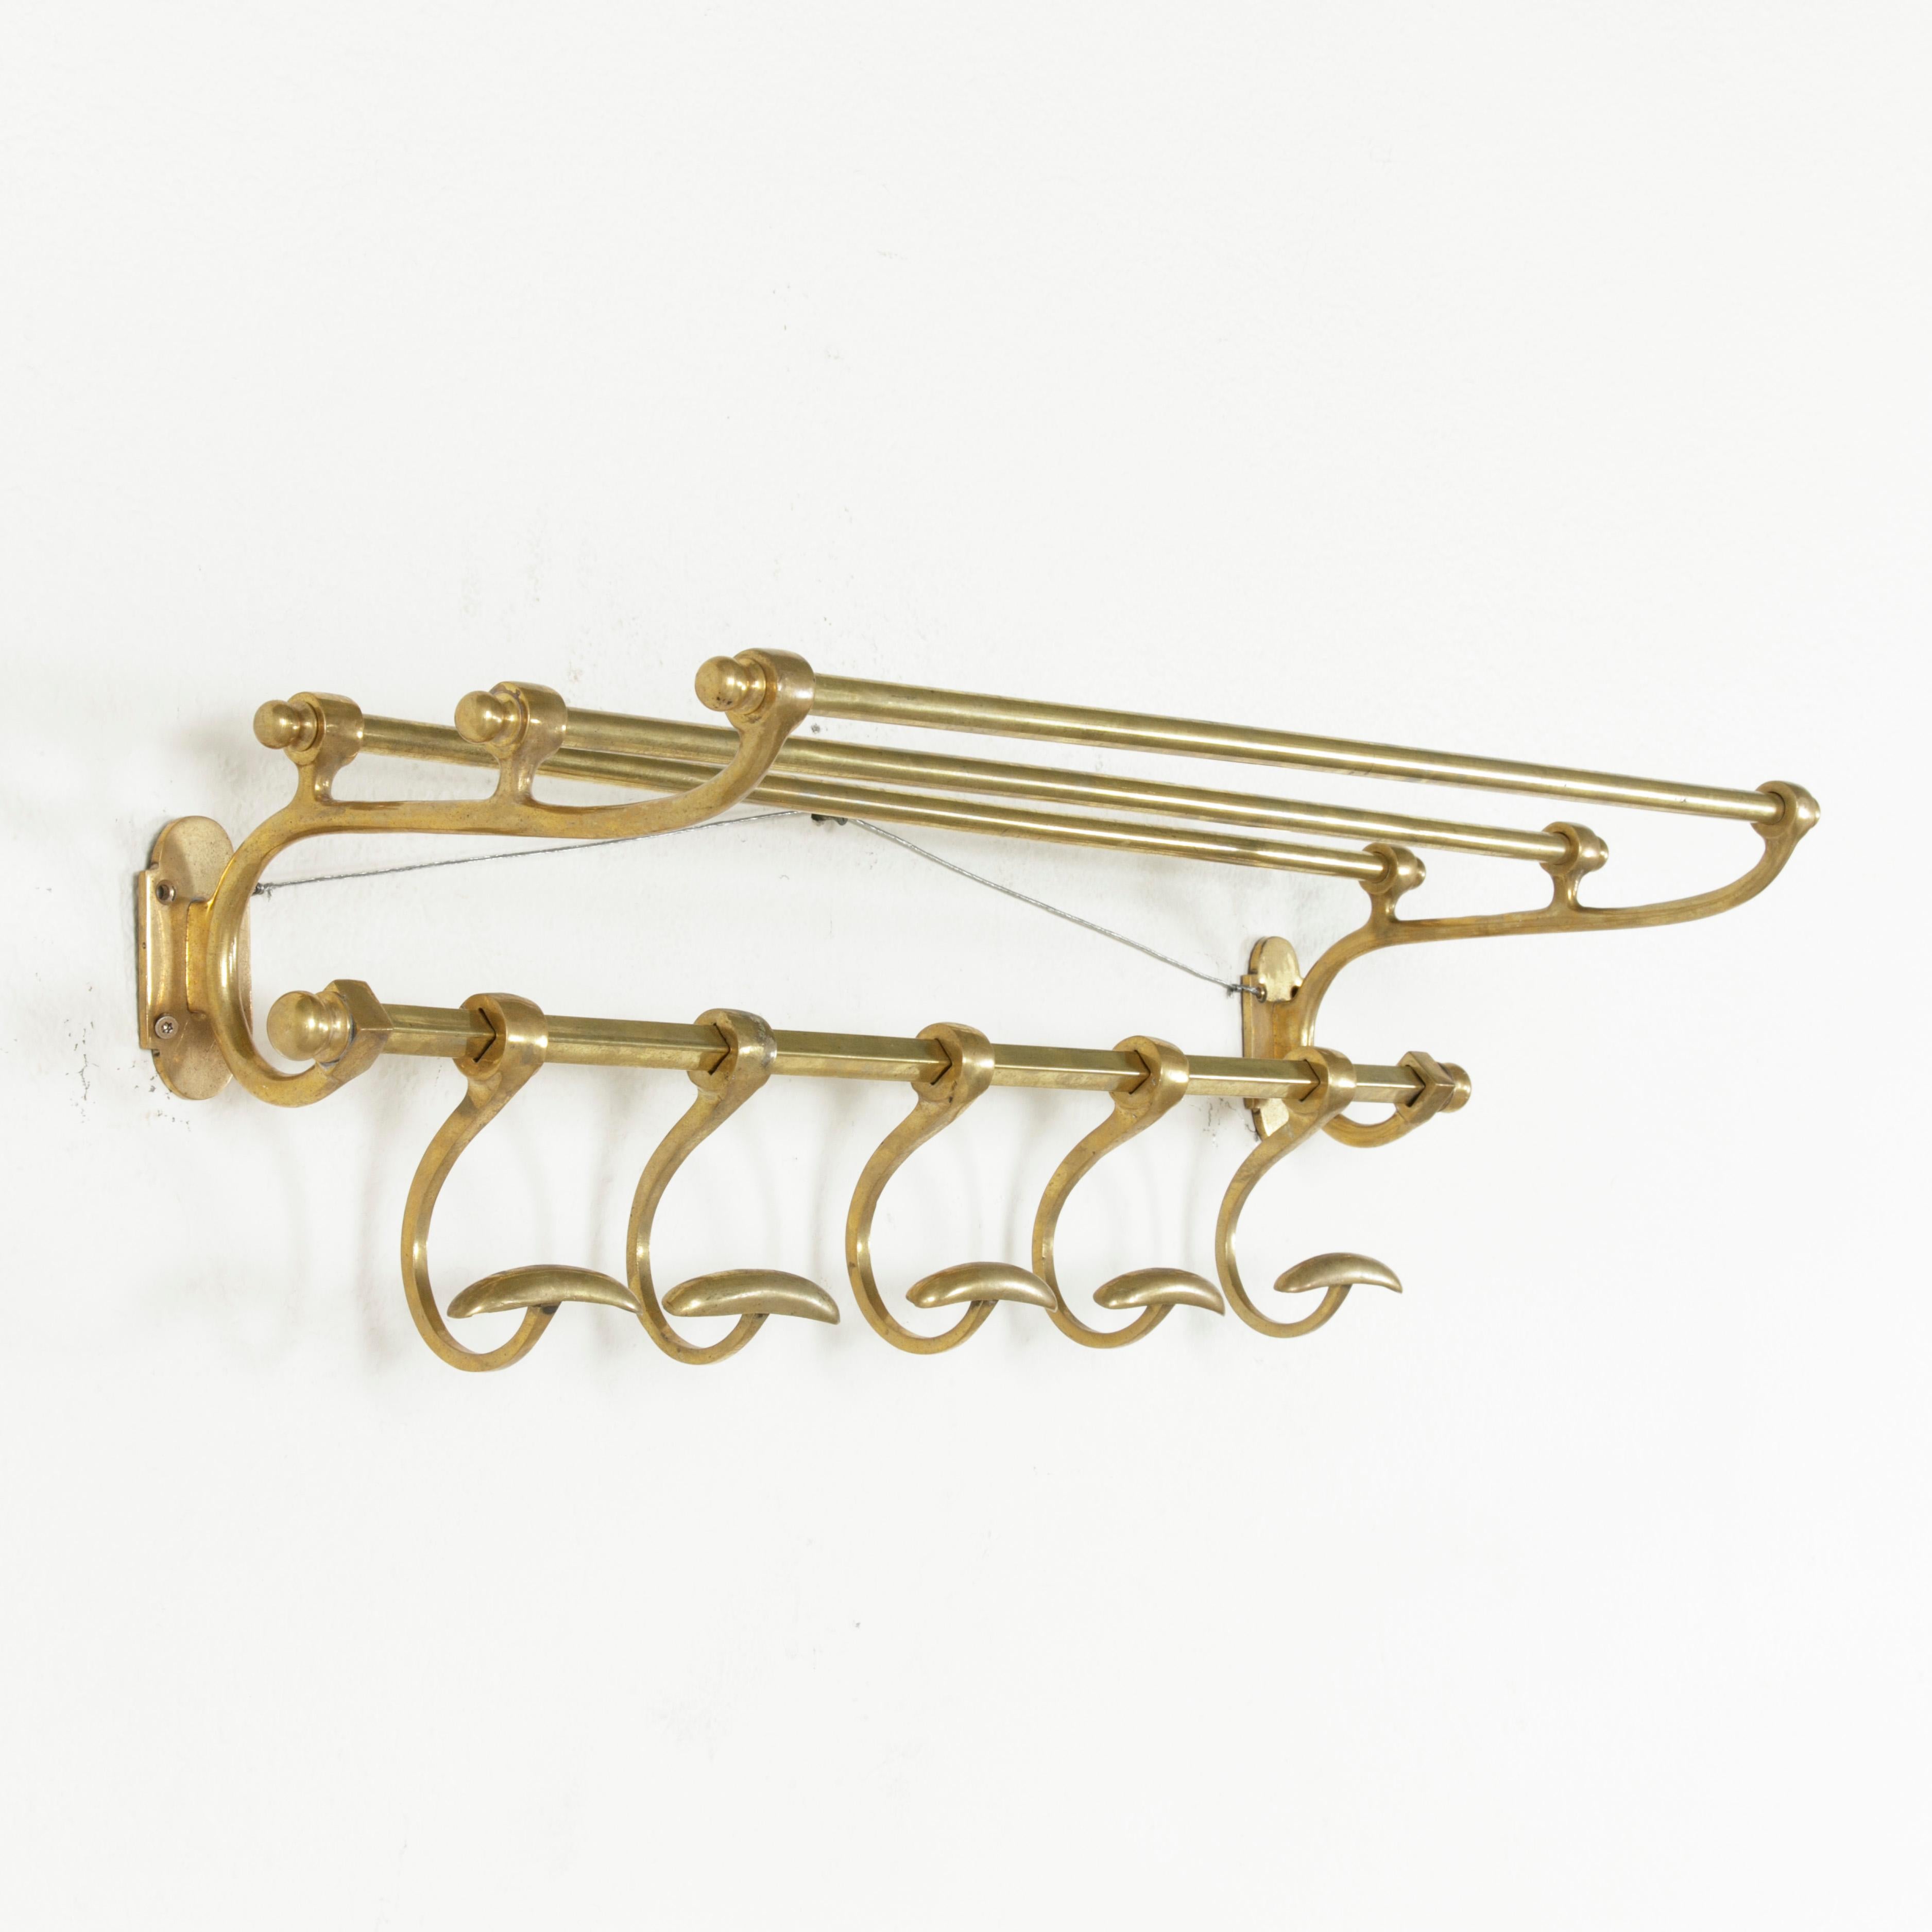 Originally form the cabin of a train, this early 20th century French hat and coat rack features an upper shelf and five sliding hooks. Its smaller scale of only 25.5 inches in width makes this piece ideal for hanging towels and robes in a bathroom,